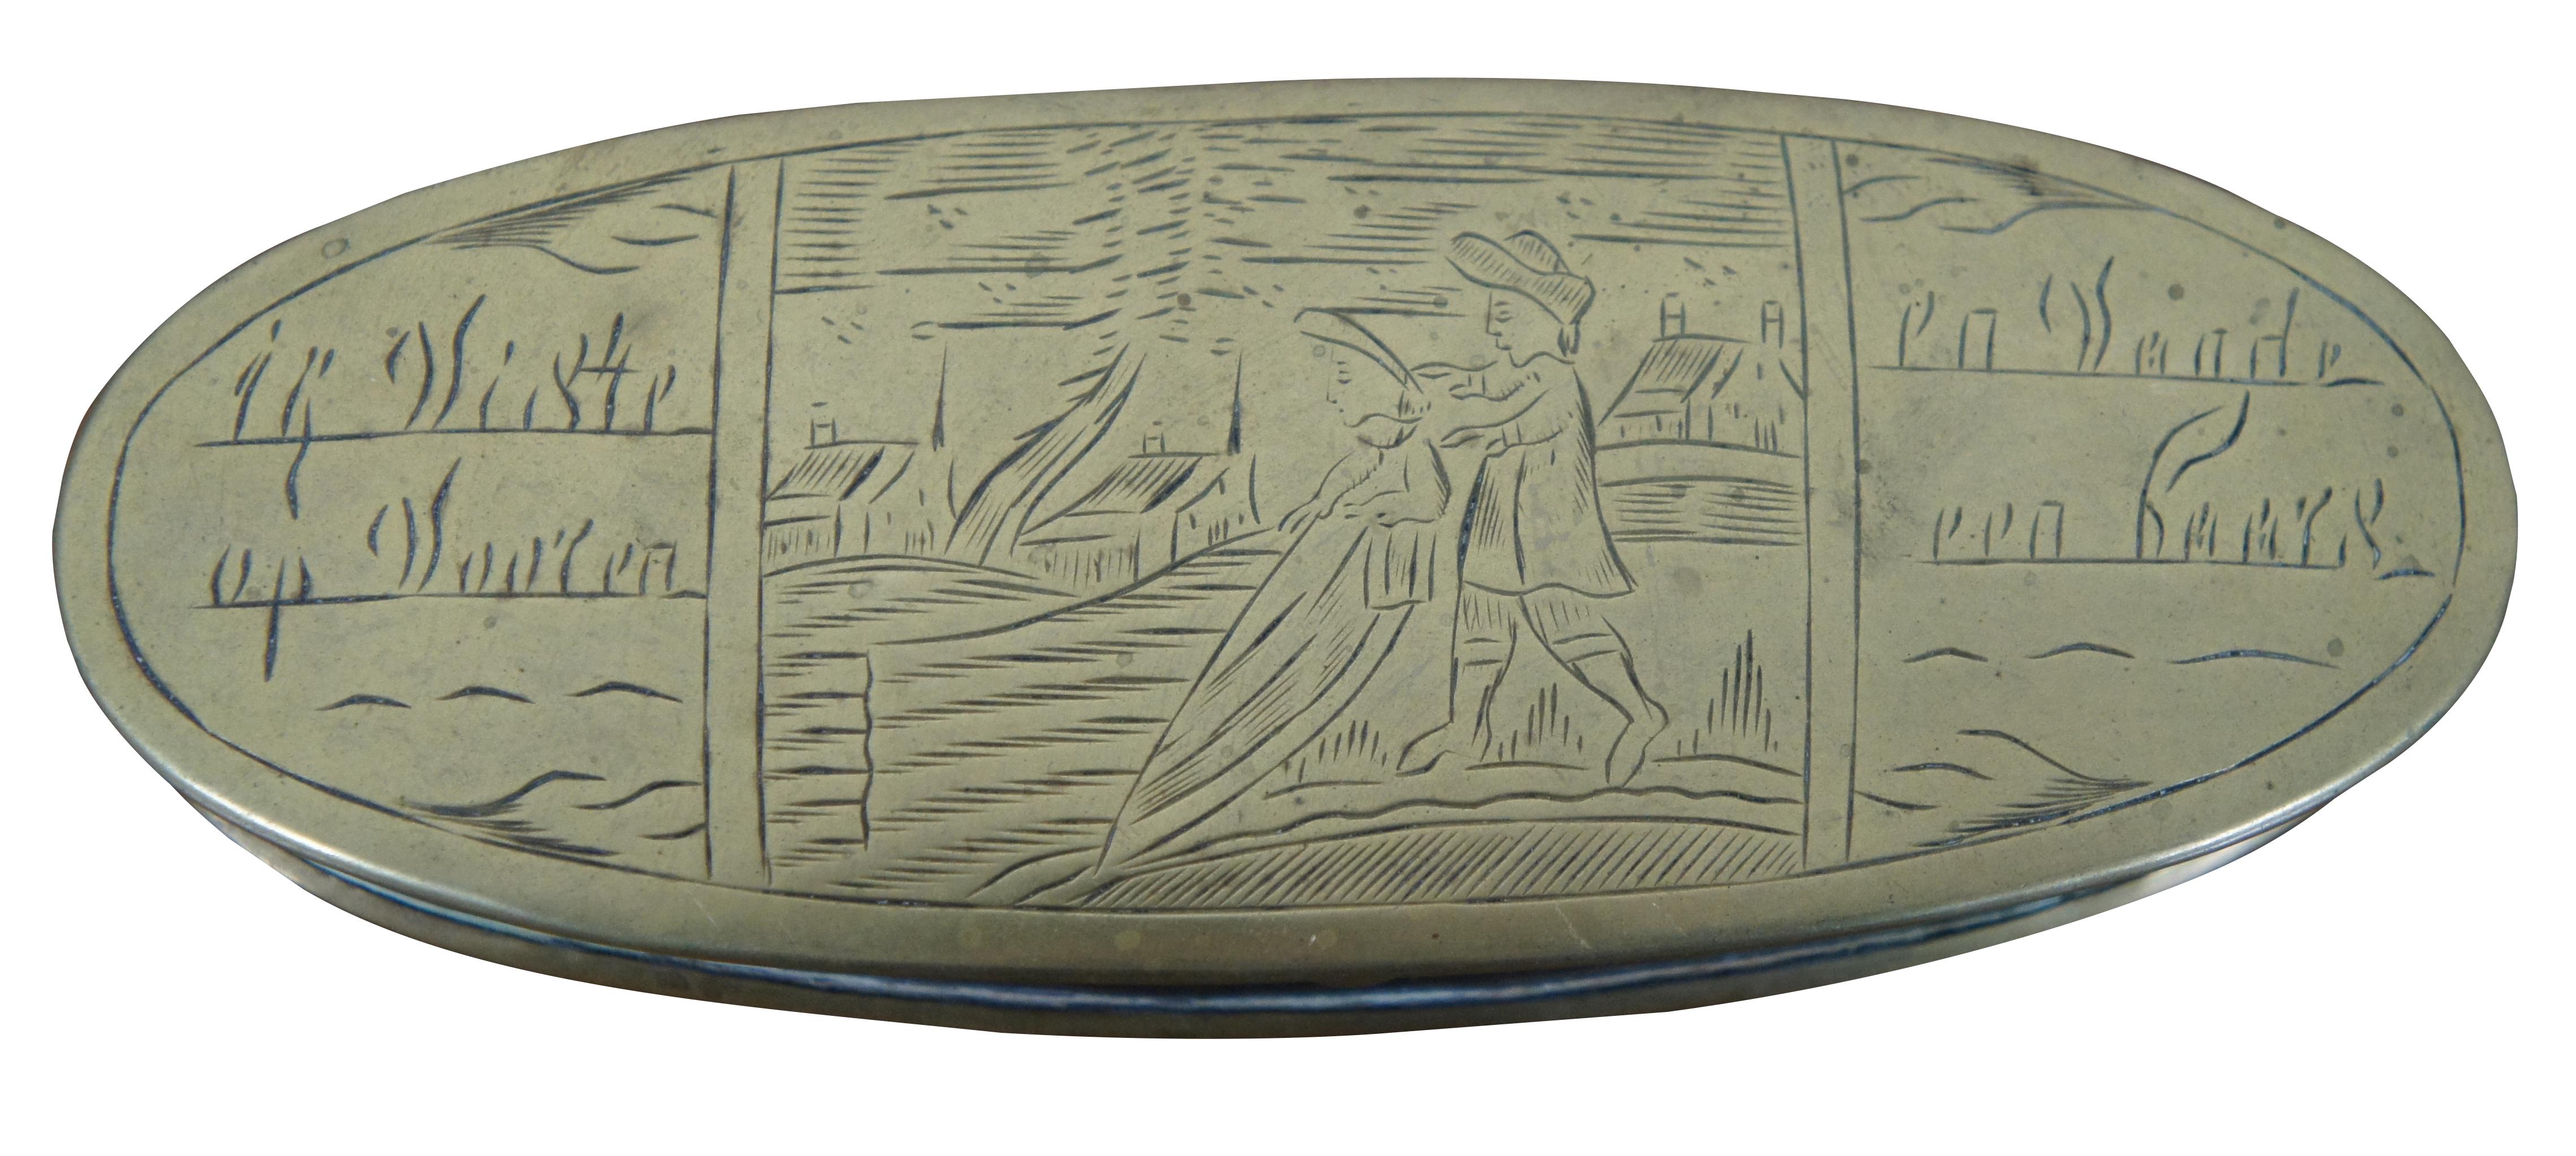 Antique late 18th century oval brass Dutch tinder / snuff / pill box, etched with phrases and a landscape of two figures plowing a field.

Voor ene goede vrind / for a good friend \[of mine\]
daar staat mijn doos steeds open. / there stays my box